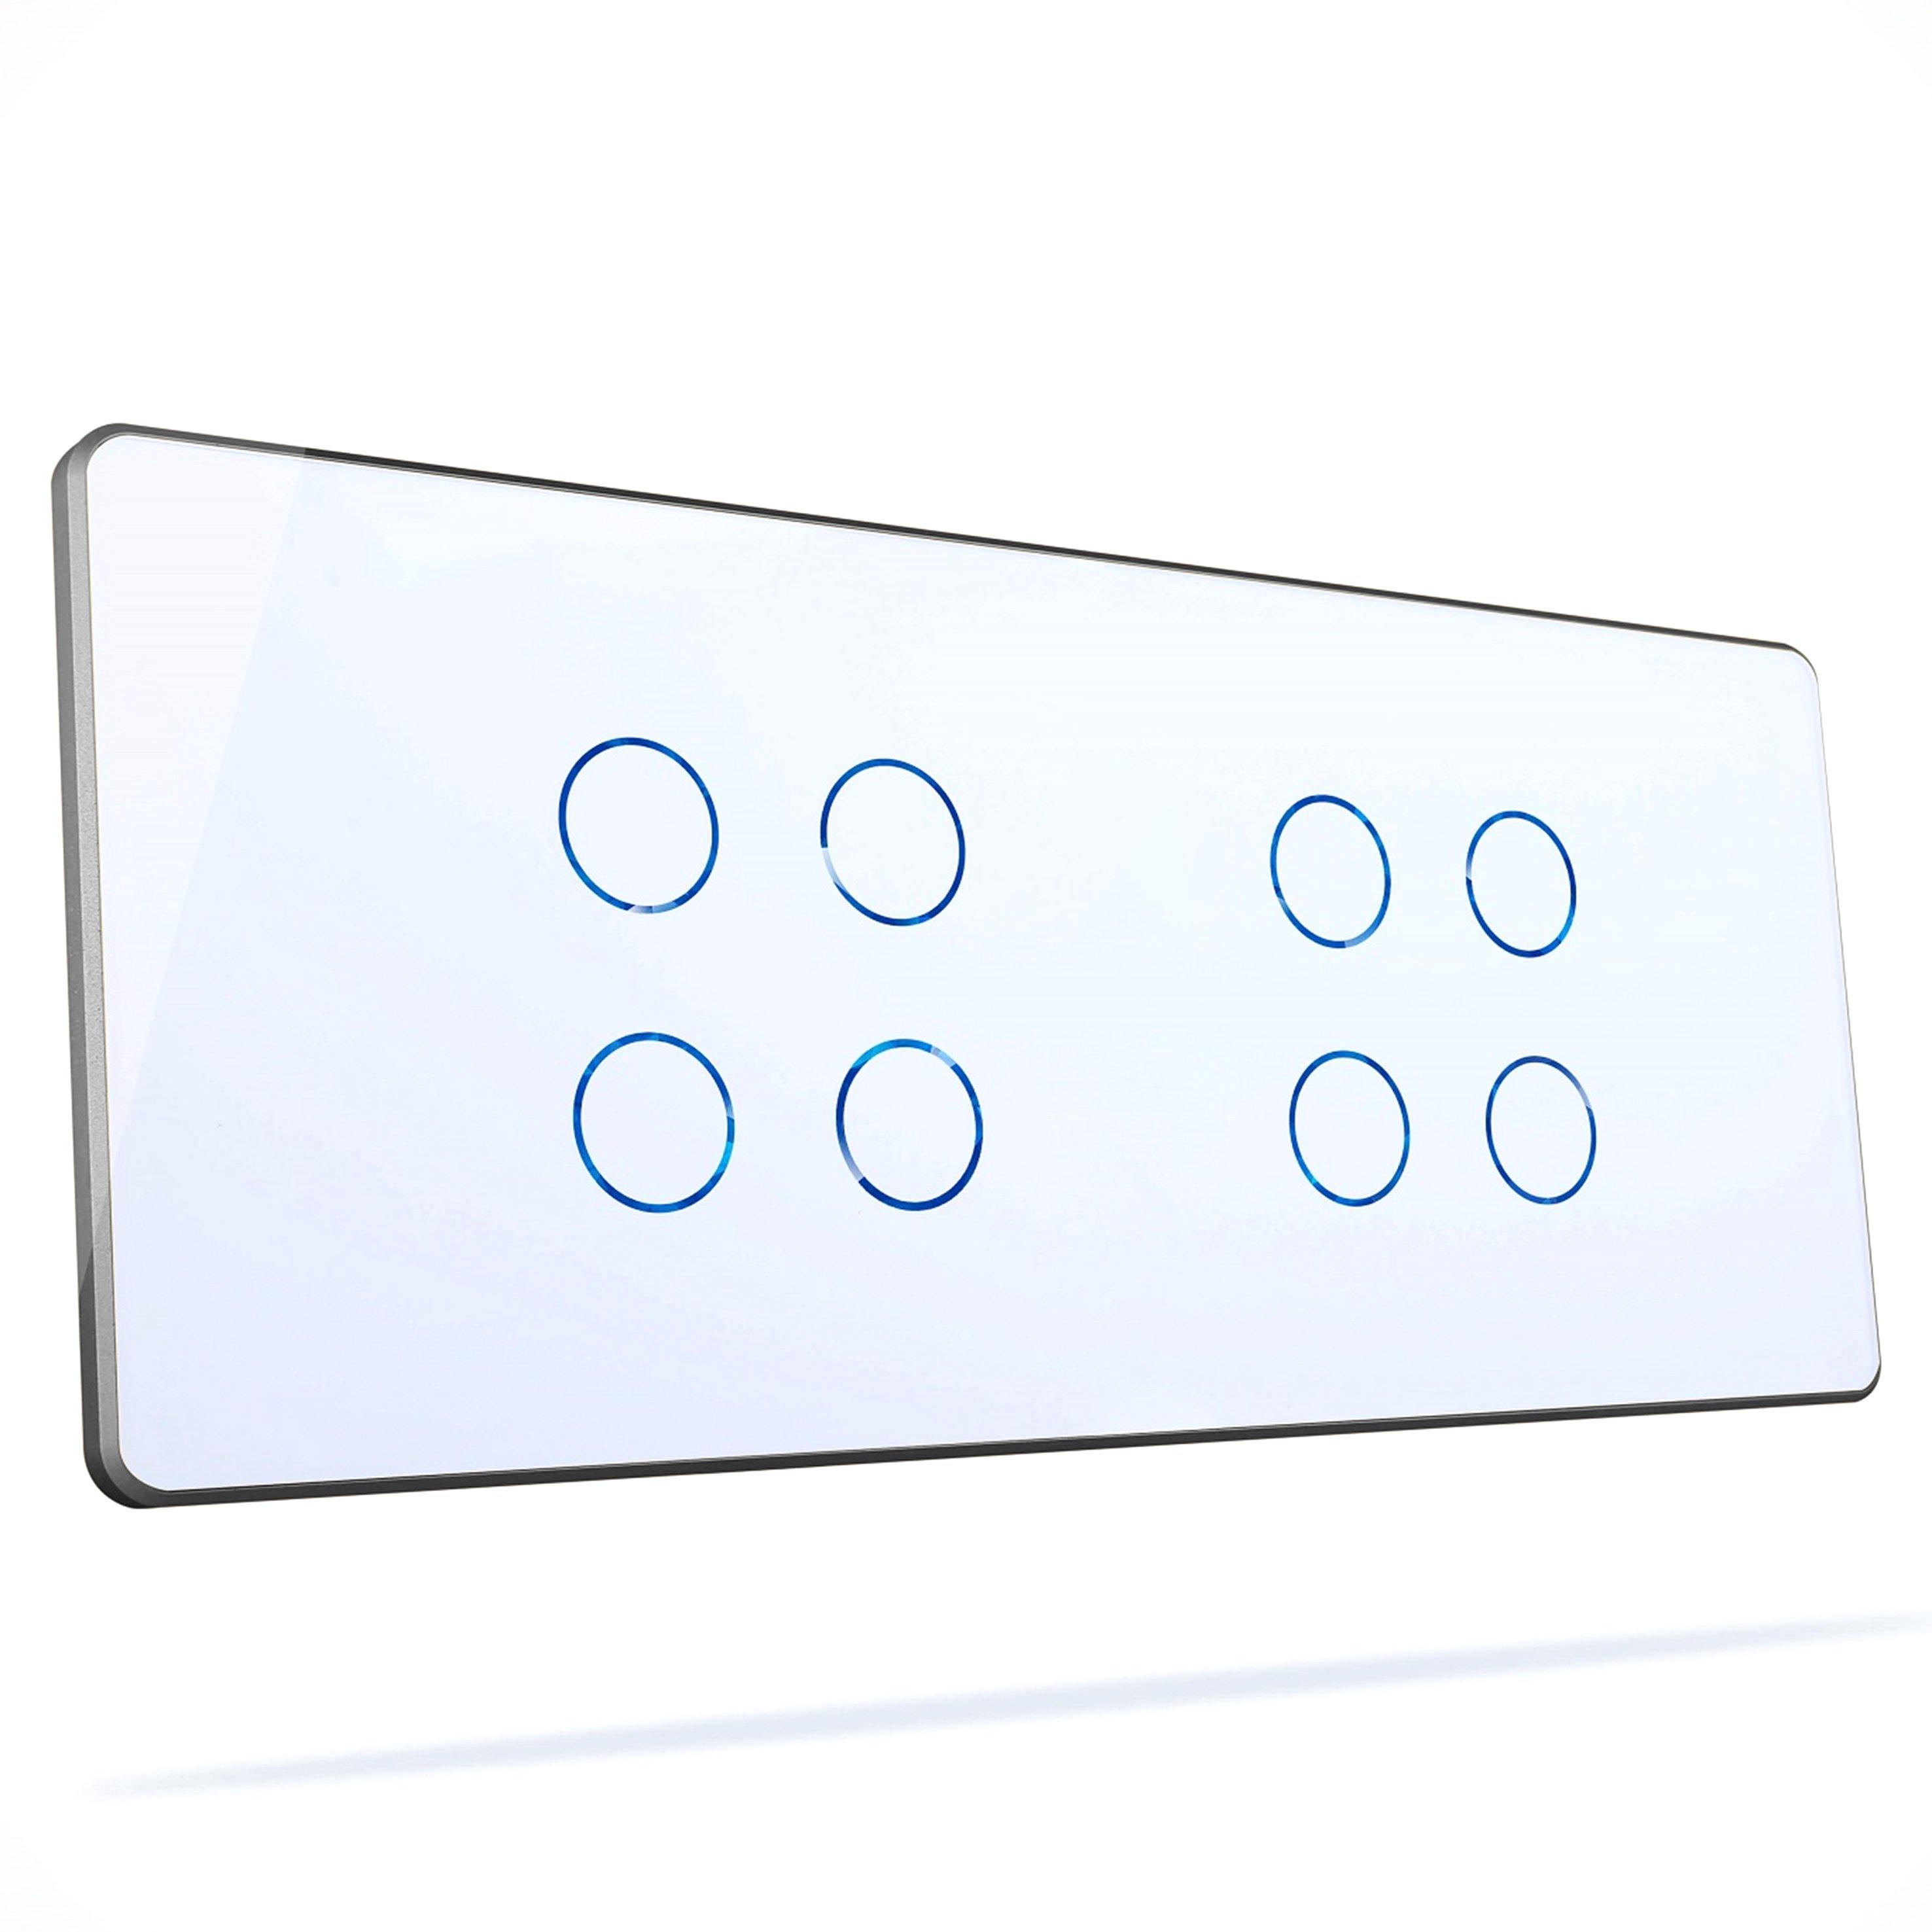 HOGAR SMART EIGHT TOUCH SWITCH PANLES WITH BUILT-IN AUTOMATION - Ankur Lighting